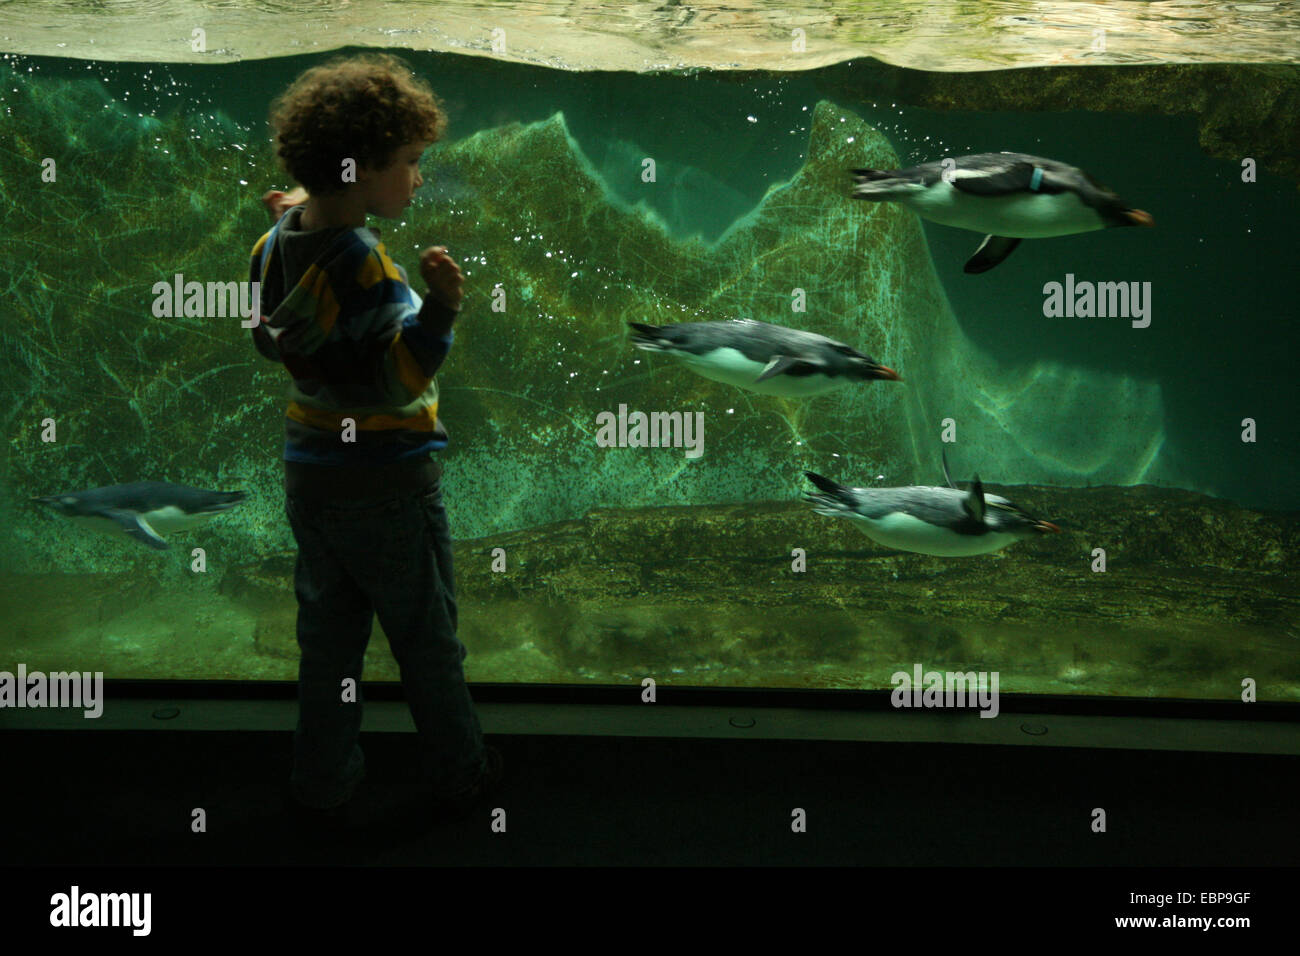 Young boy looks at rockhopper penguins (Eudyptes chrysocome) swimming at Schonbrunn Zoo in Vienna, Austria. Stock Photo